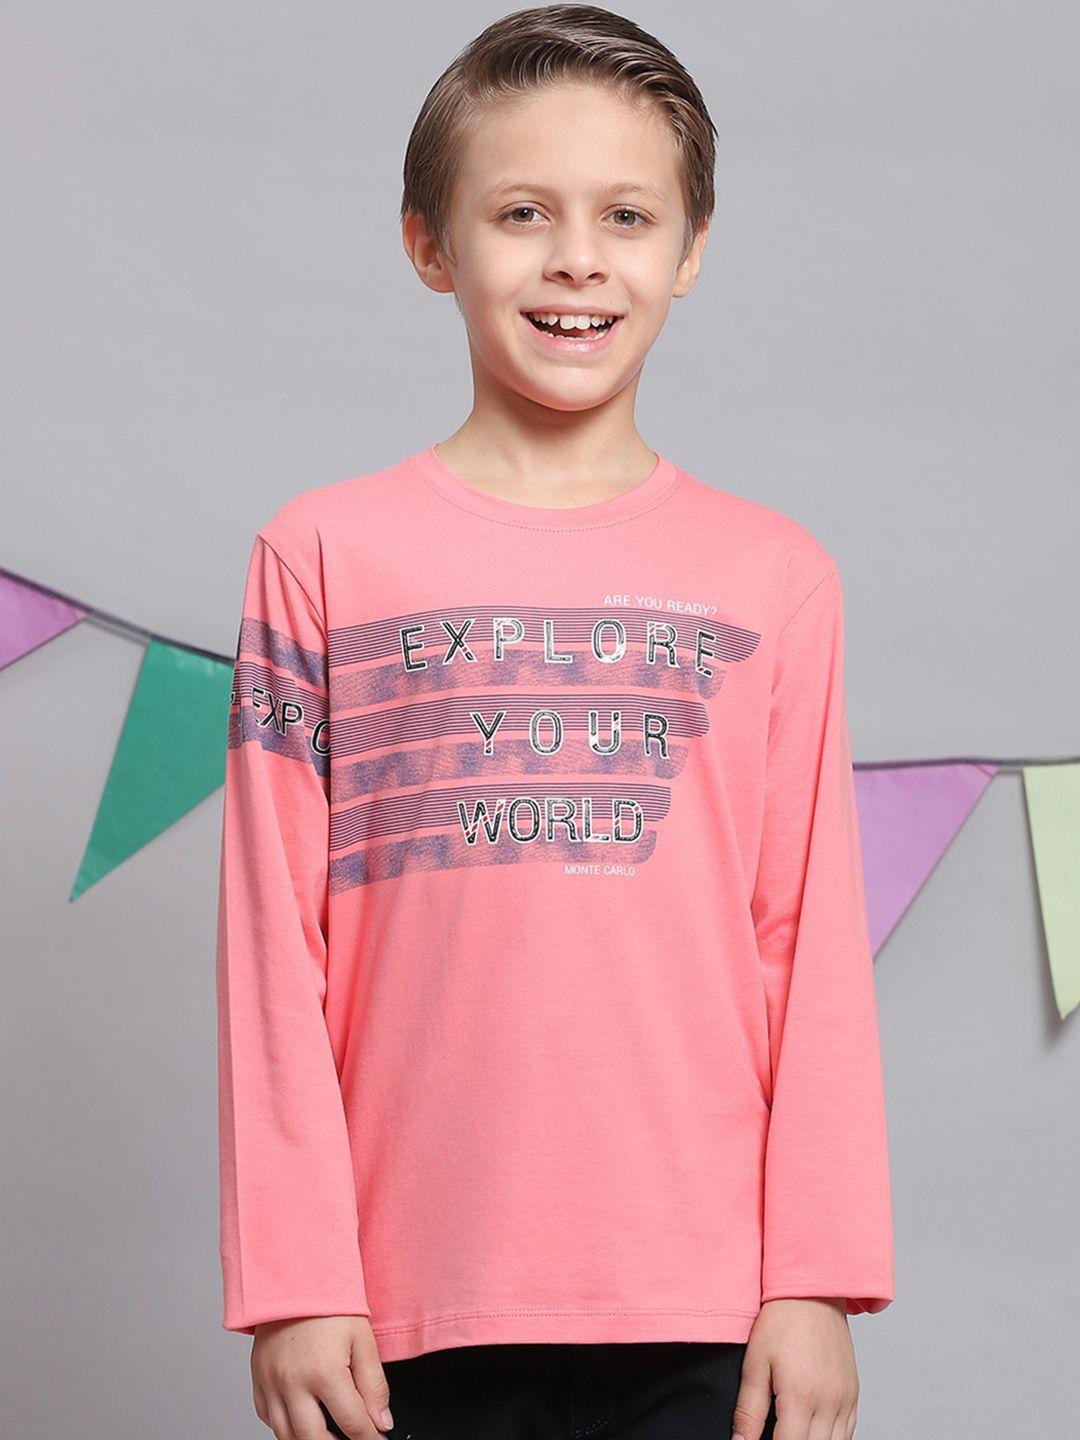 monte carlo boys typography printed pure cotton t-shirt